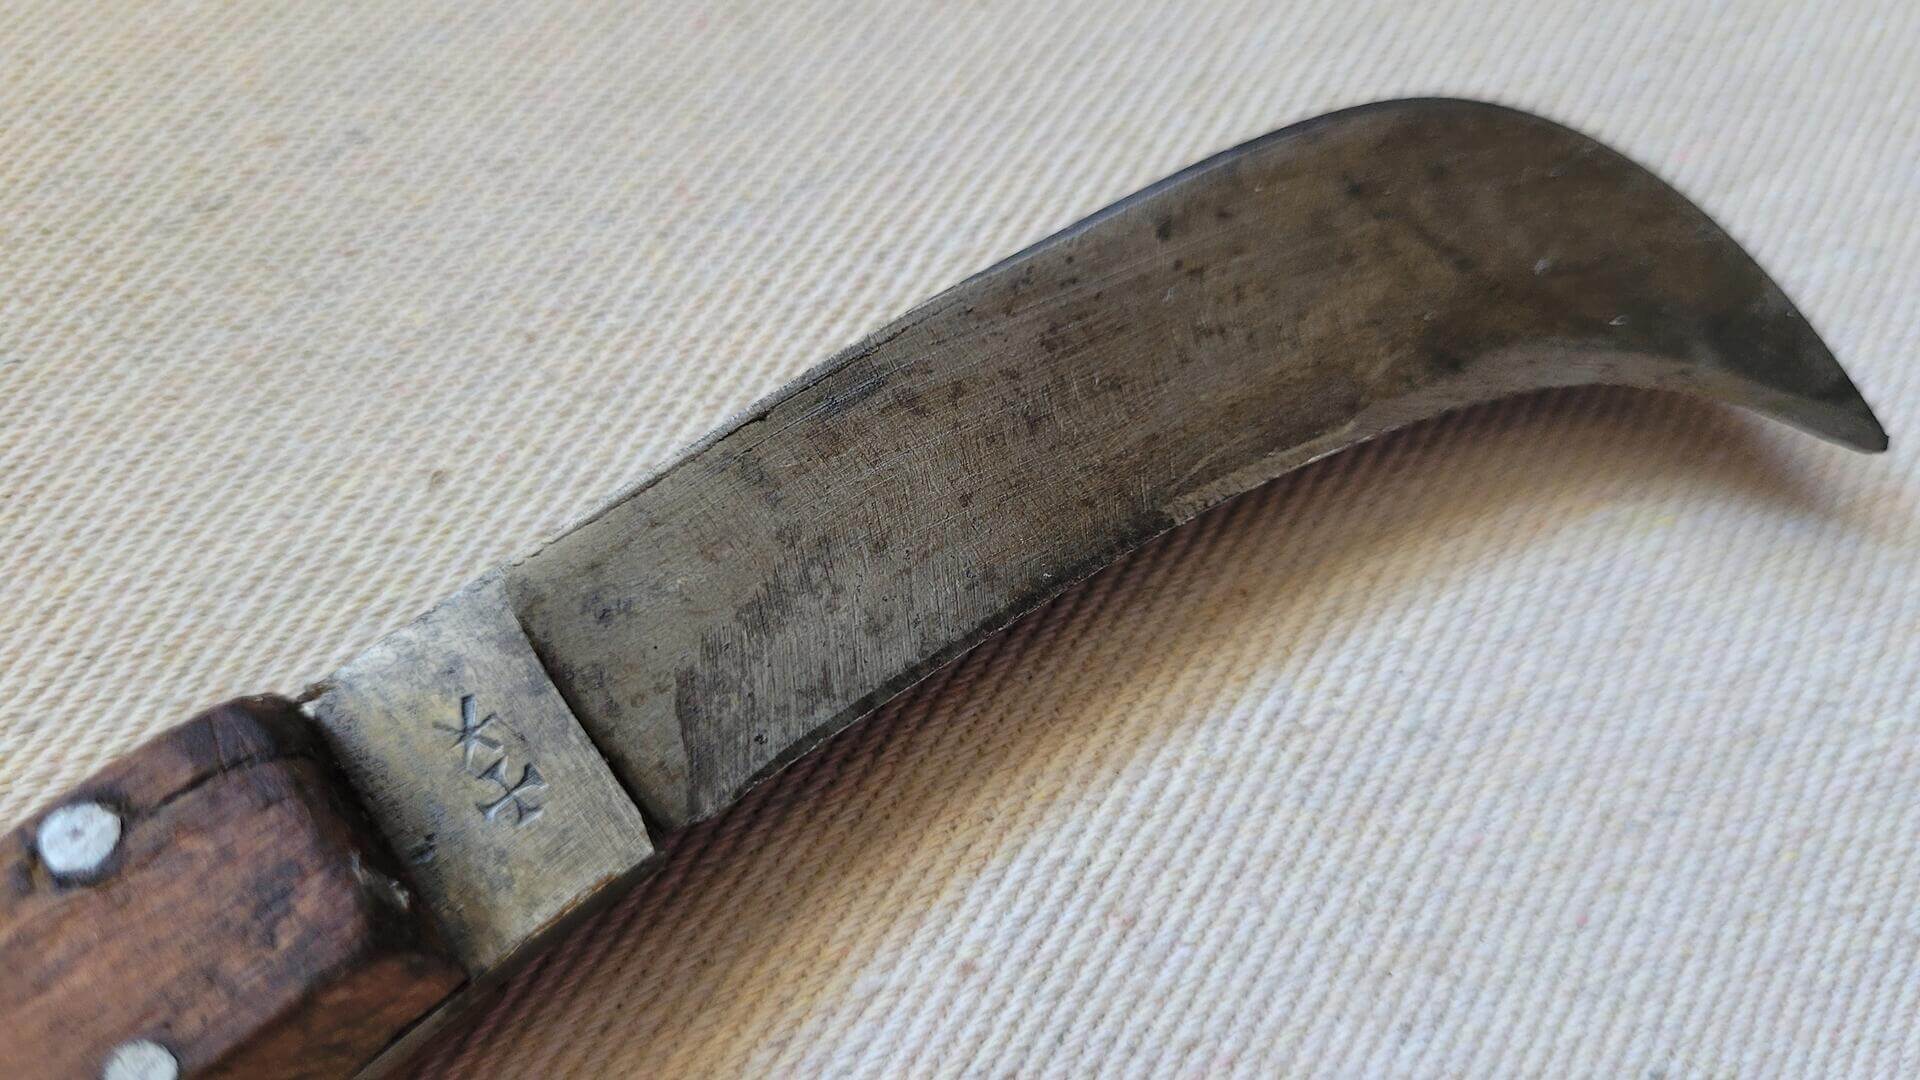 Antique Joseph Rodgers & Sons No 6 Norfolk Street Sheffield Curved Knife - Rare vintage collectible made in England knives and cutting tools